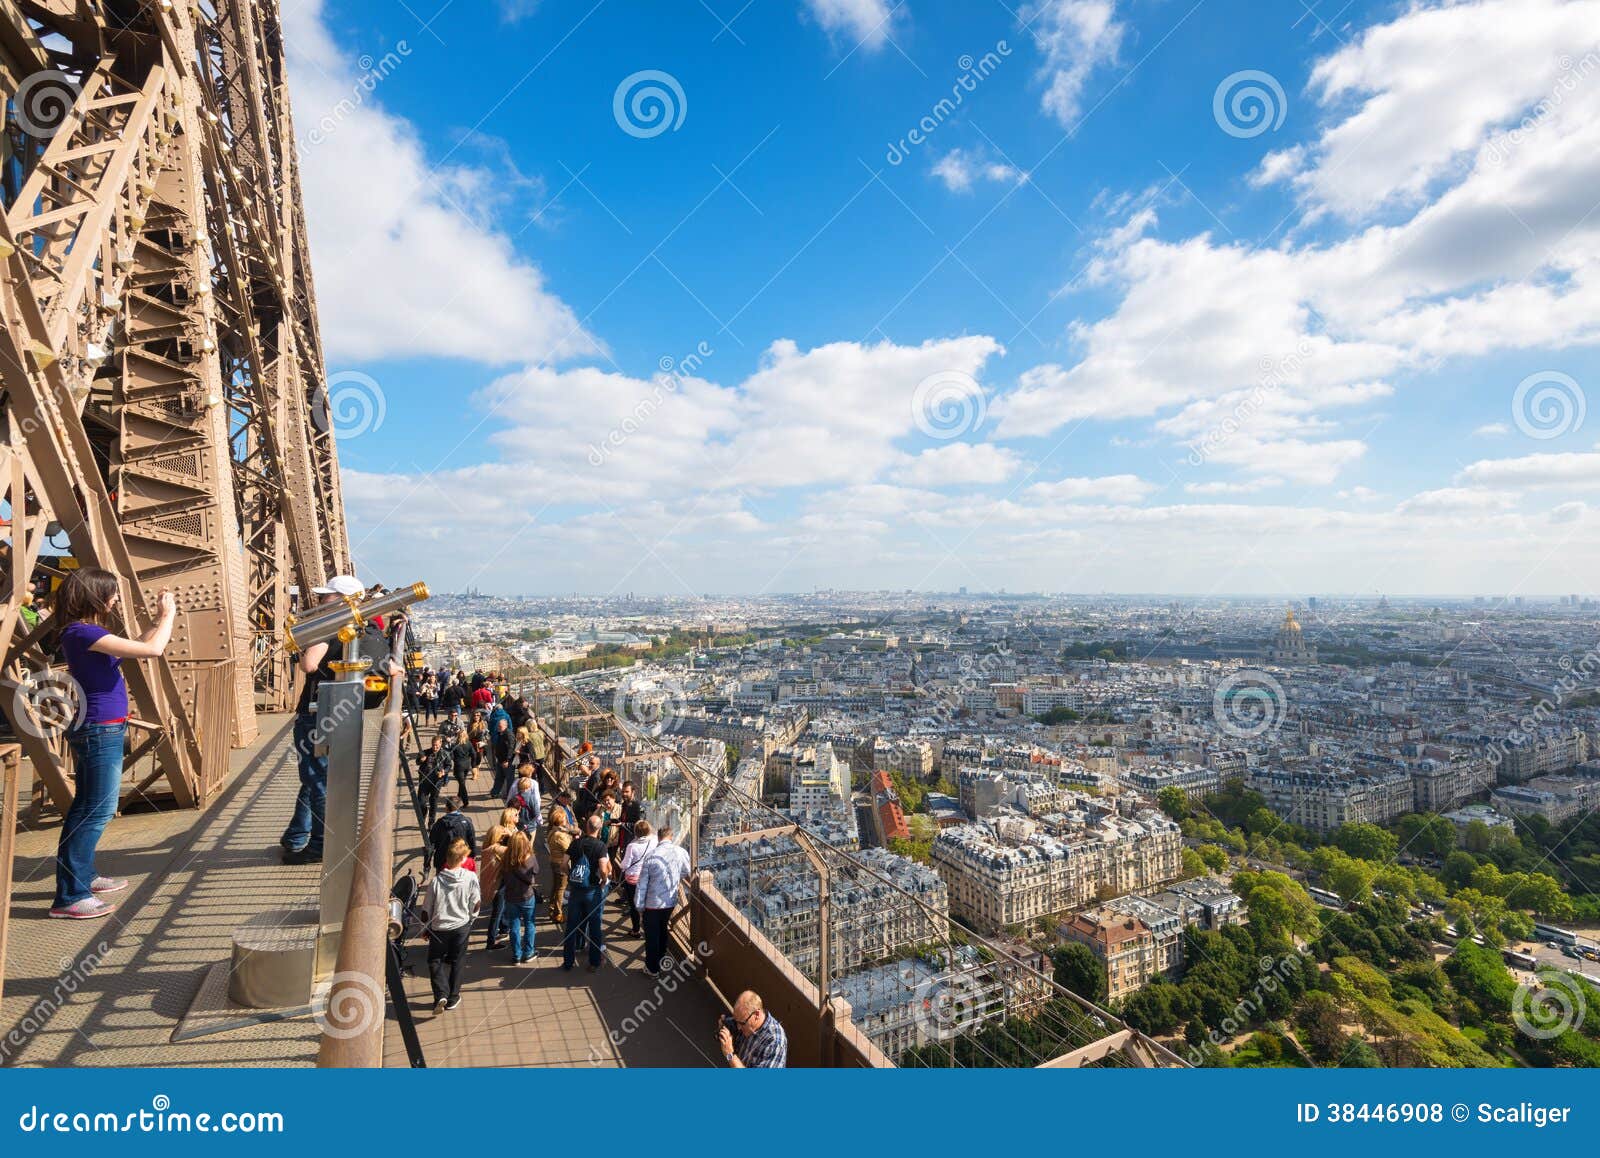 Observation Deck of the Eiffel Tower in Paris Editorial Stock